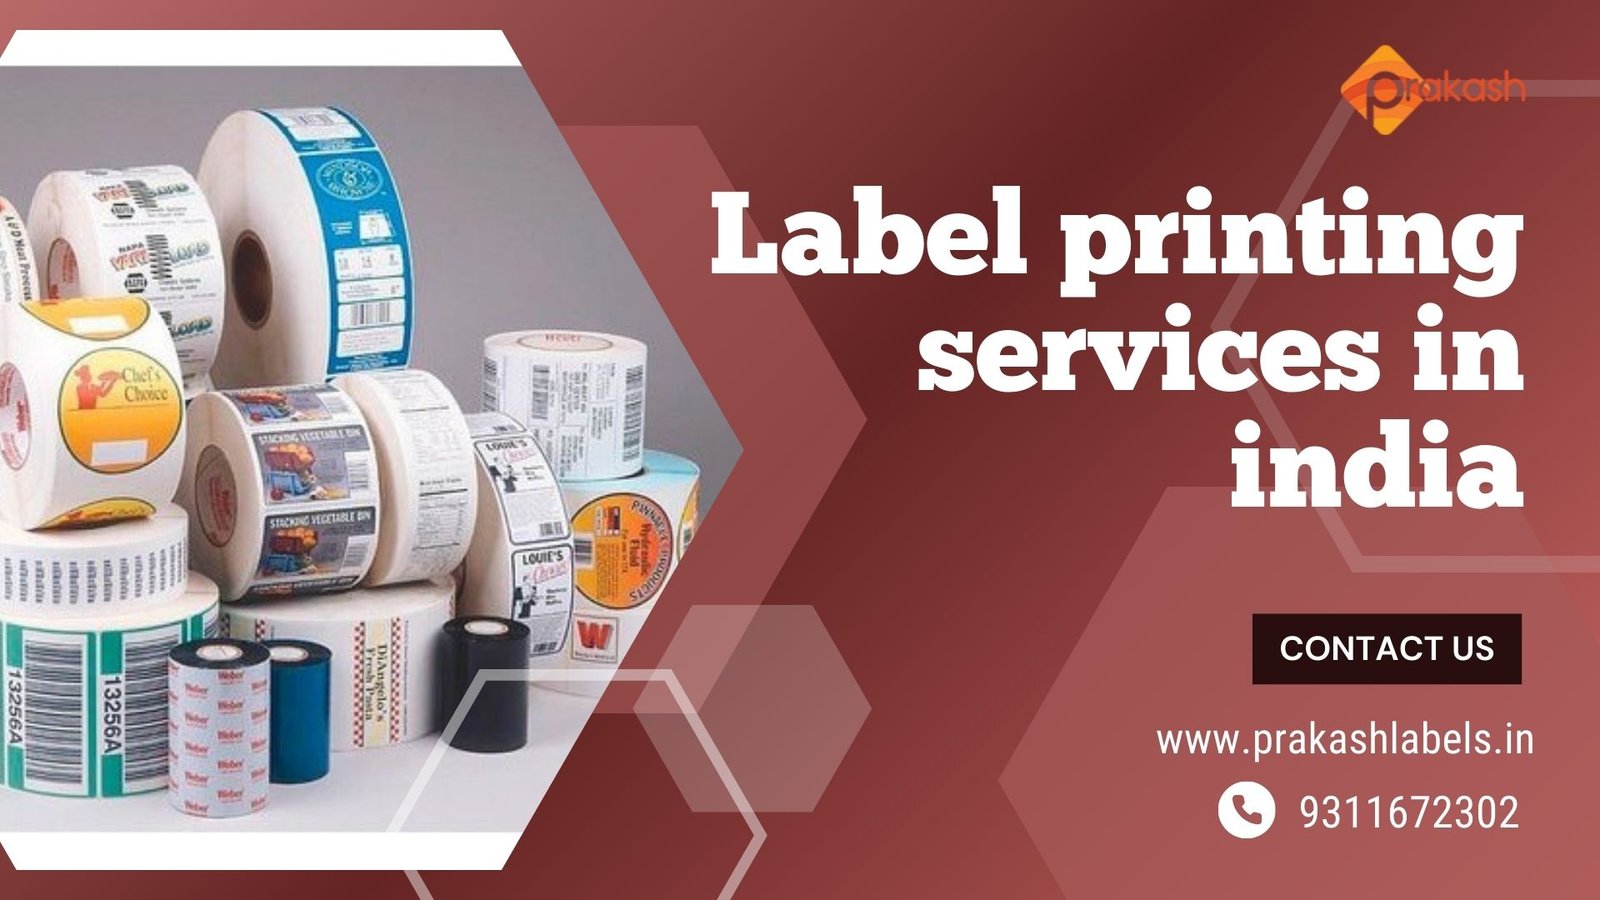 The Best Label Printing Services in India for Your Every Need